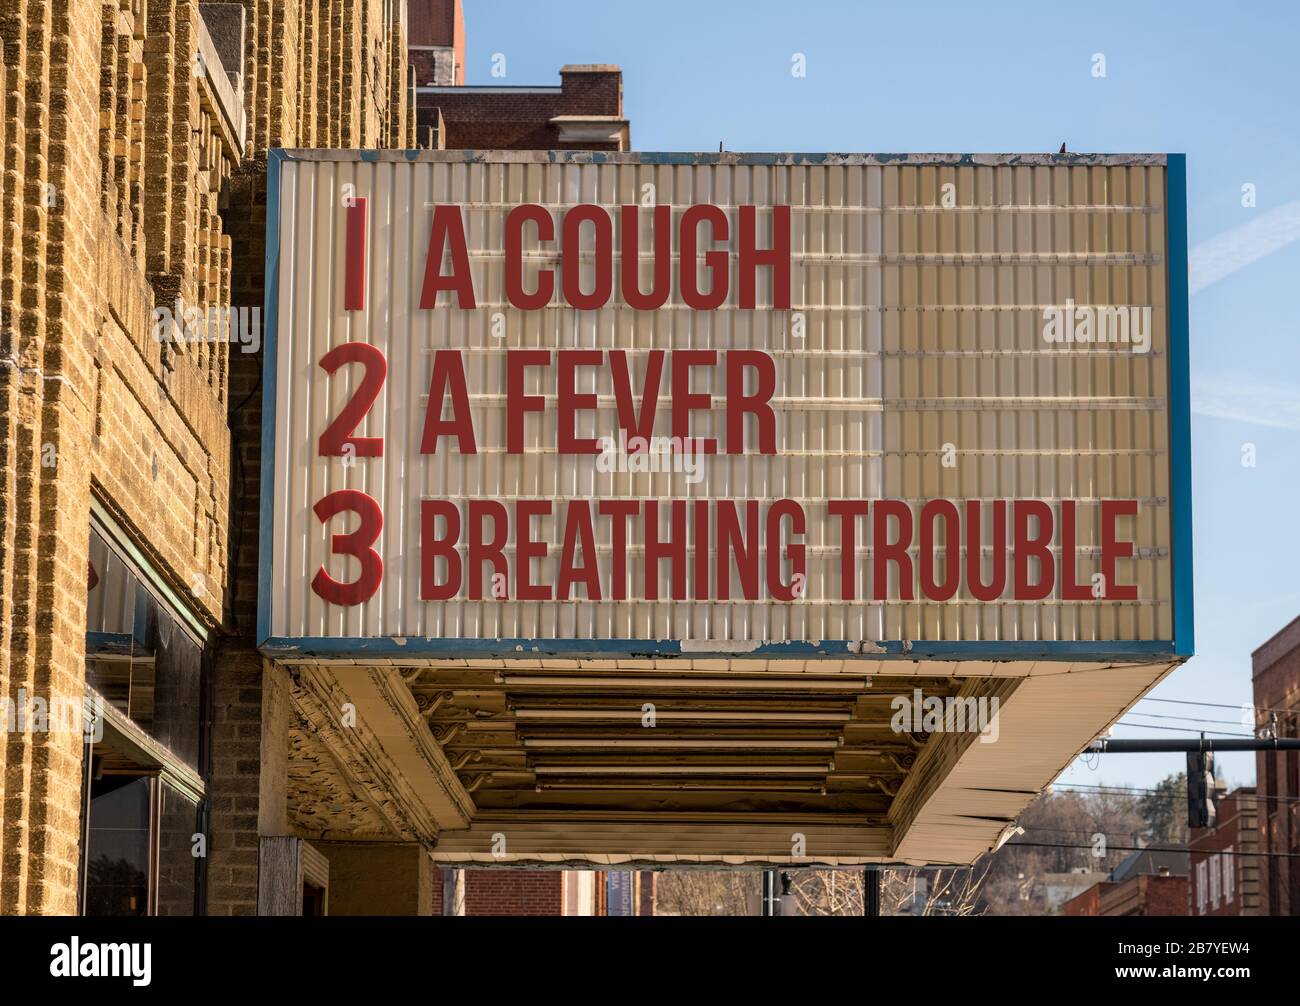 Cinema billboard with three main symptoms or signs of a coronavirus or Covid-19 infection of coughing, feverish and trouble with breathing Stock Photo